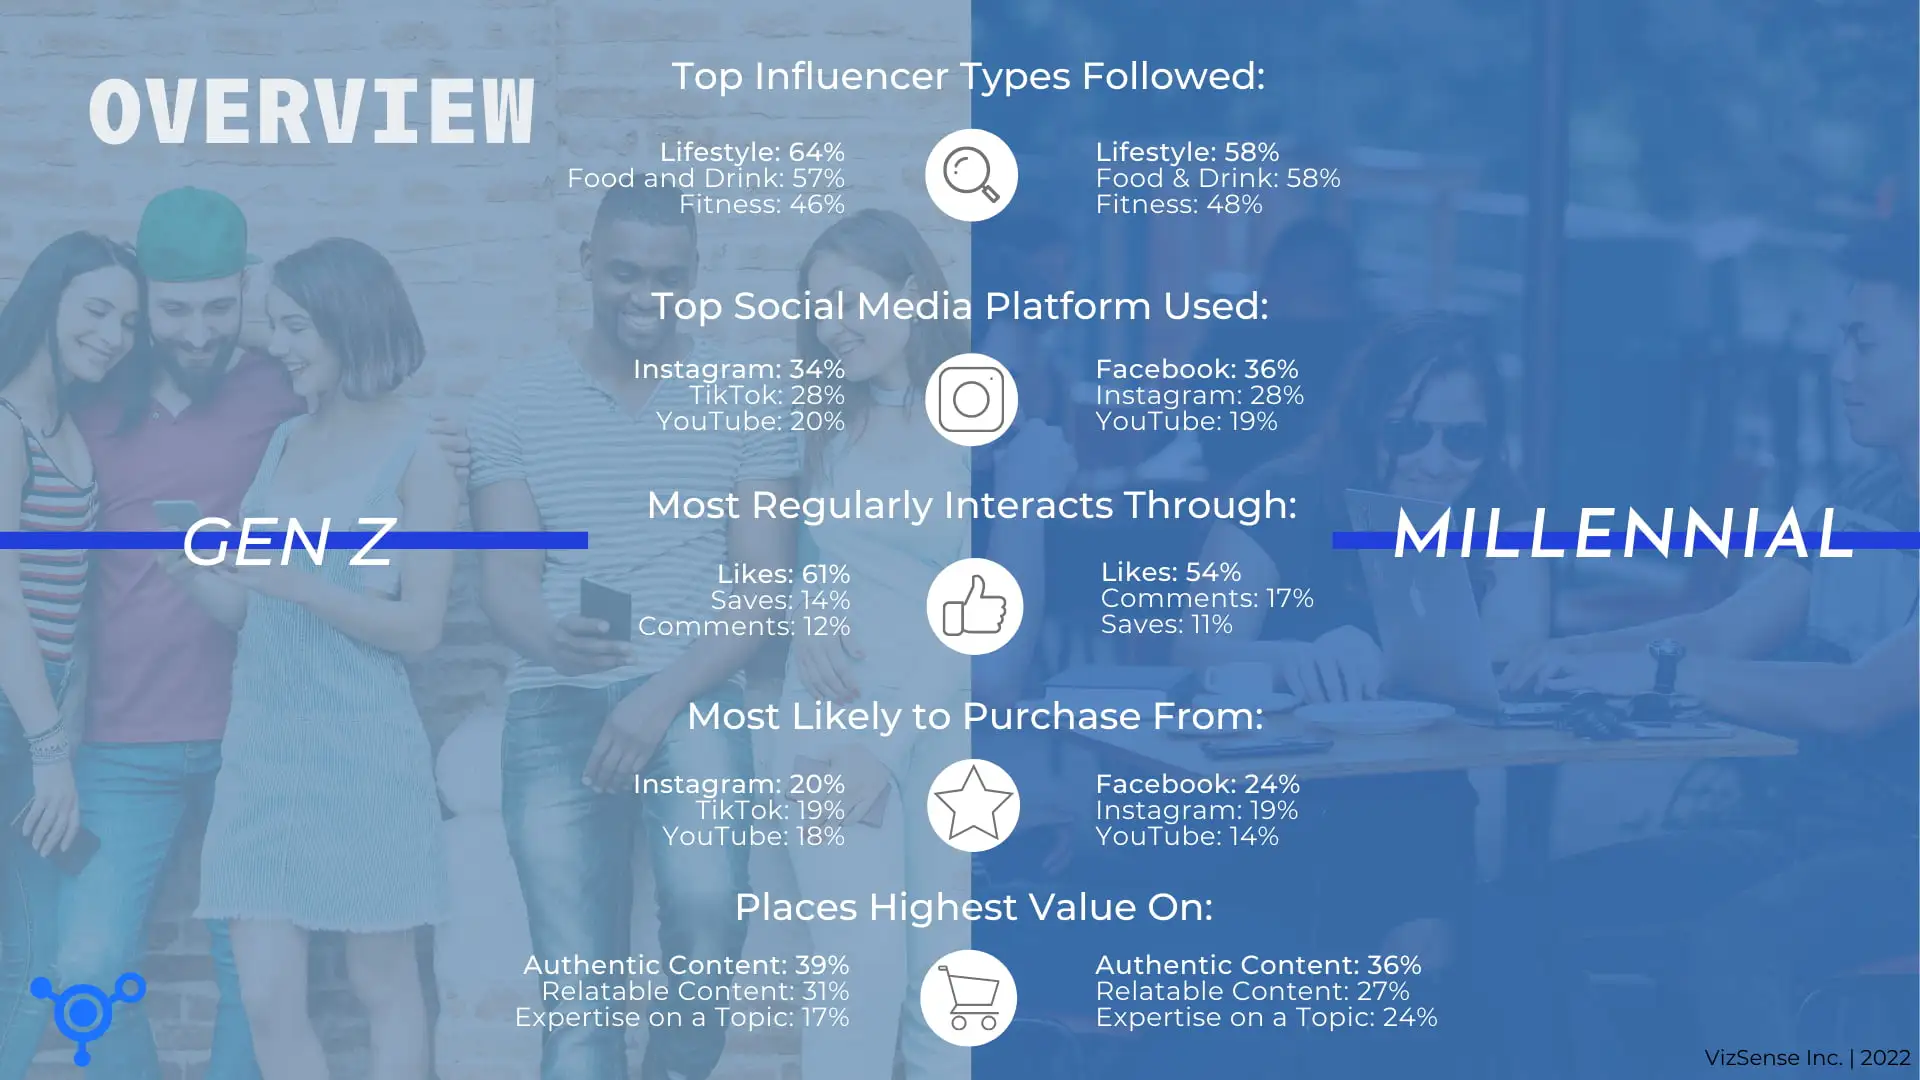 Image showing Gen Z prefers Lifestyle influencers, Instagram as their social media of choice, interacting on social media with likes, Instagram as their purchasing platform, and authentic content VS Millenials who prefer Lifestyle influencers, Facebook as their social media of choice, interacting on social media with likes, Facebook as their purchasing platform, and authentic content.